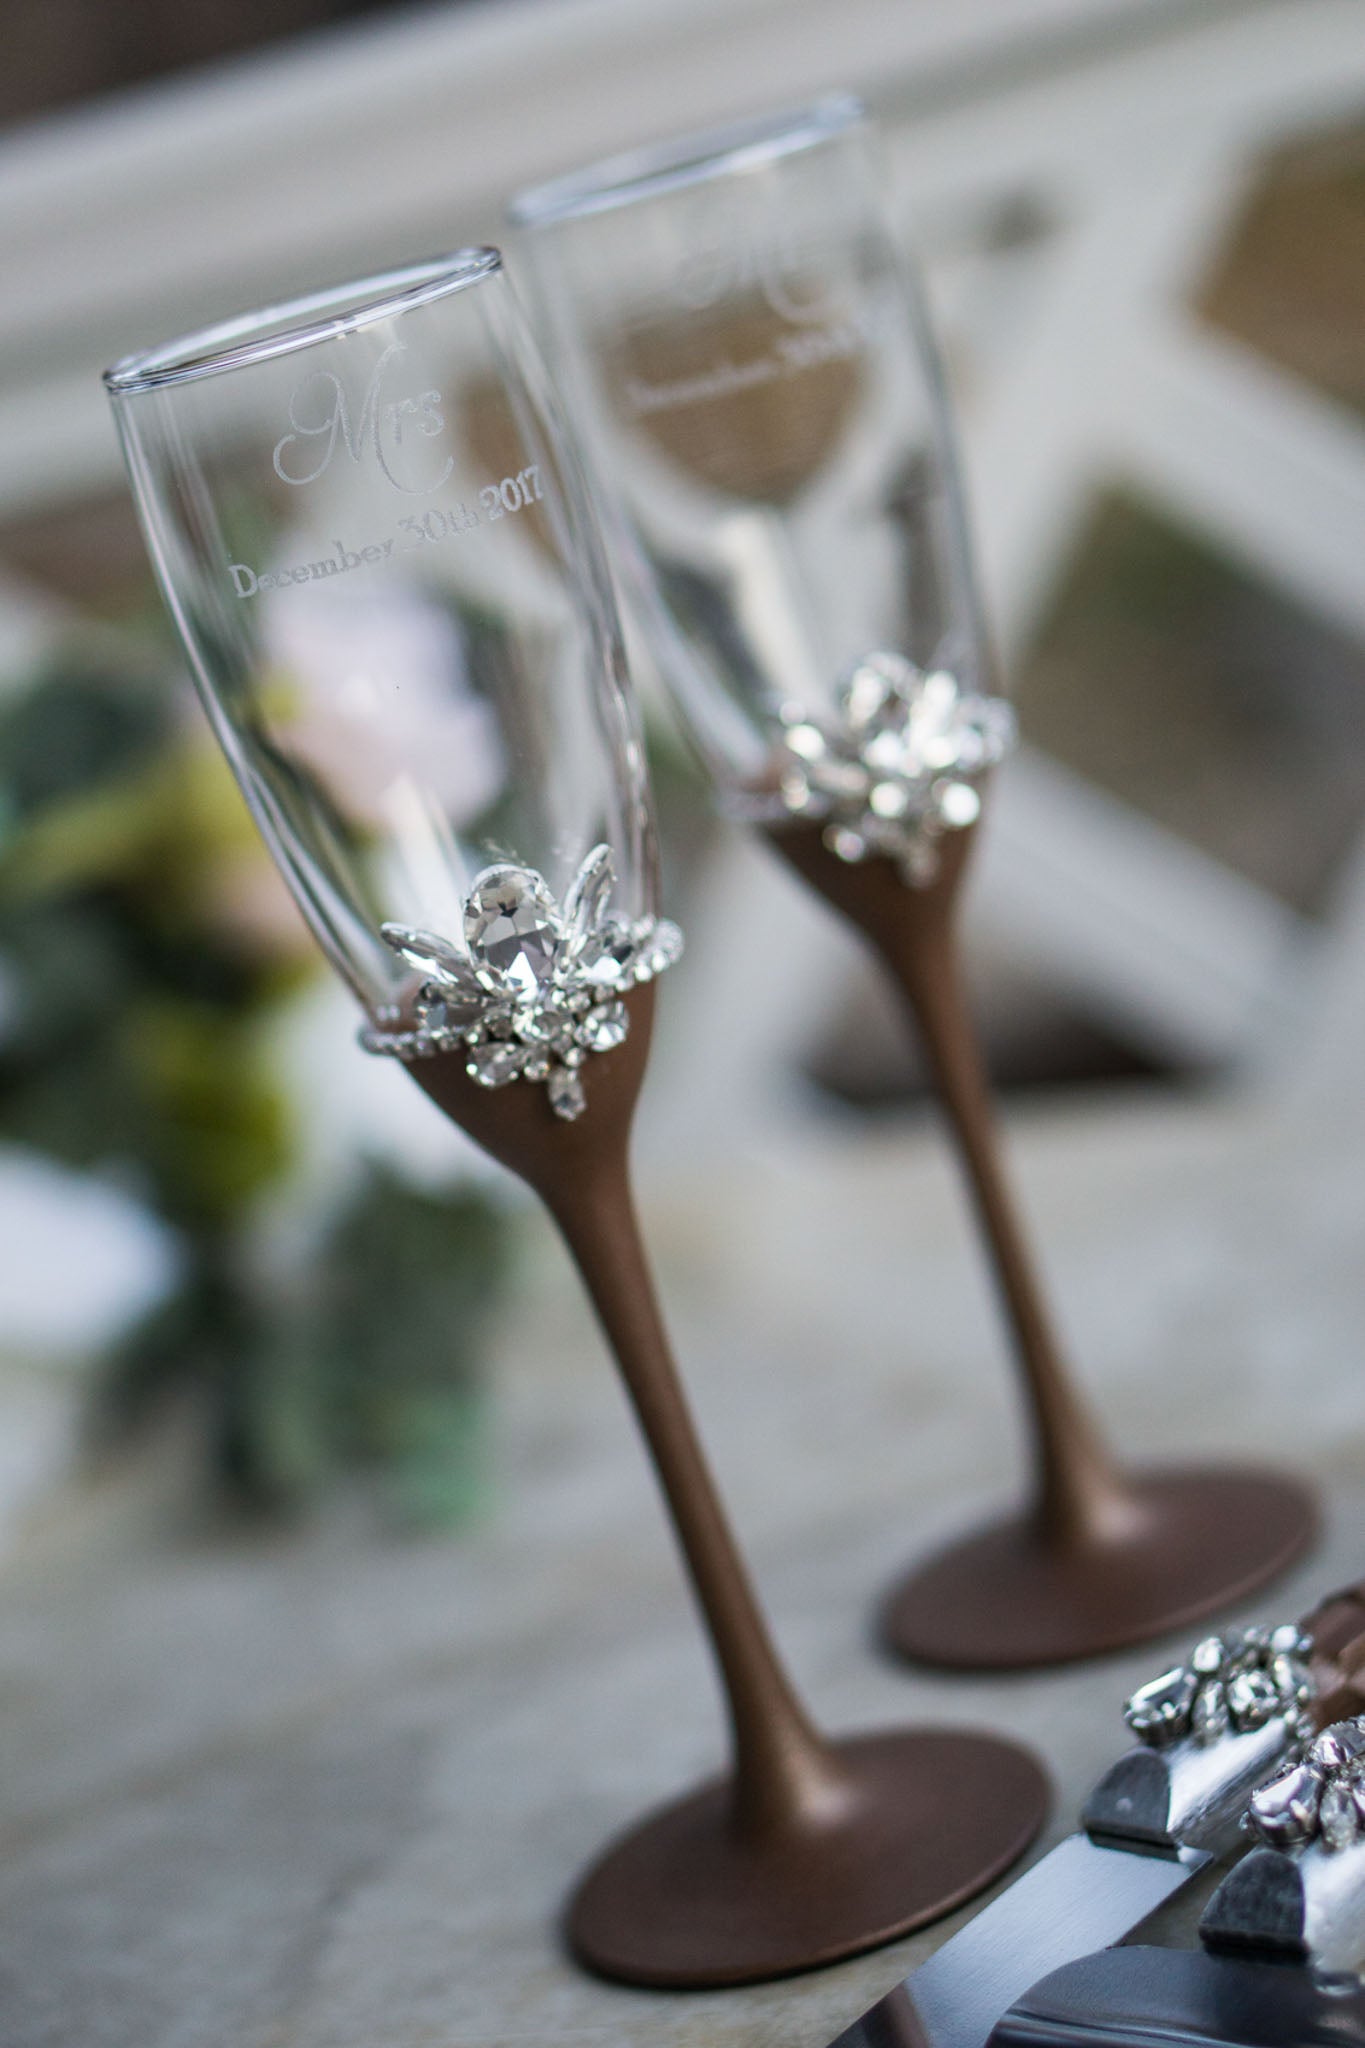 Handcrafted fusion wedding glasses